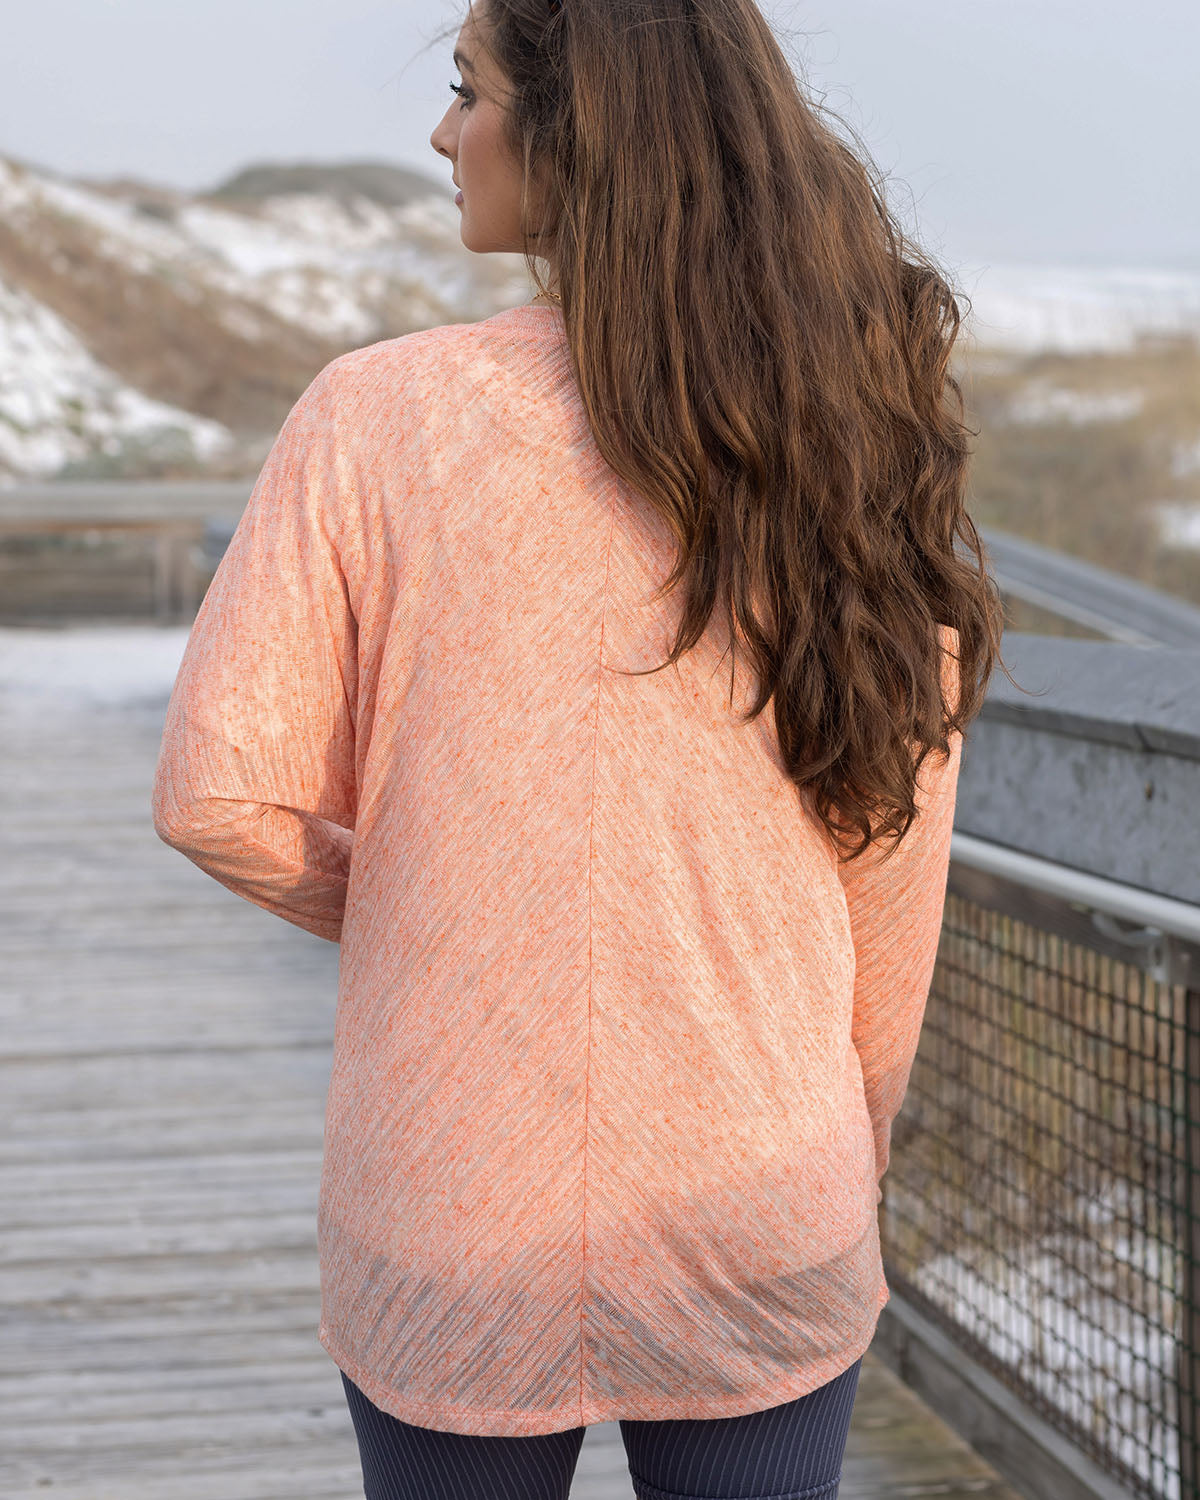 Airy Cocoon Slub Cardigan in FINAL Grace Lace Dreamsicle SALE - and 